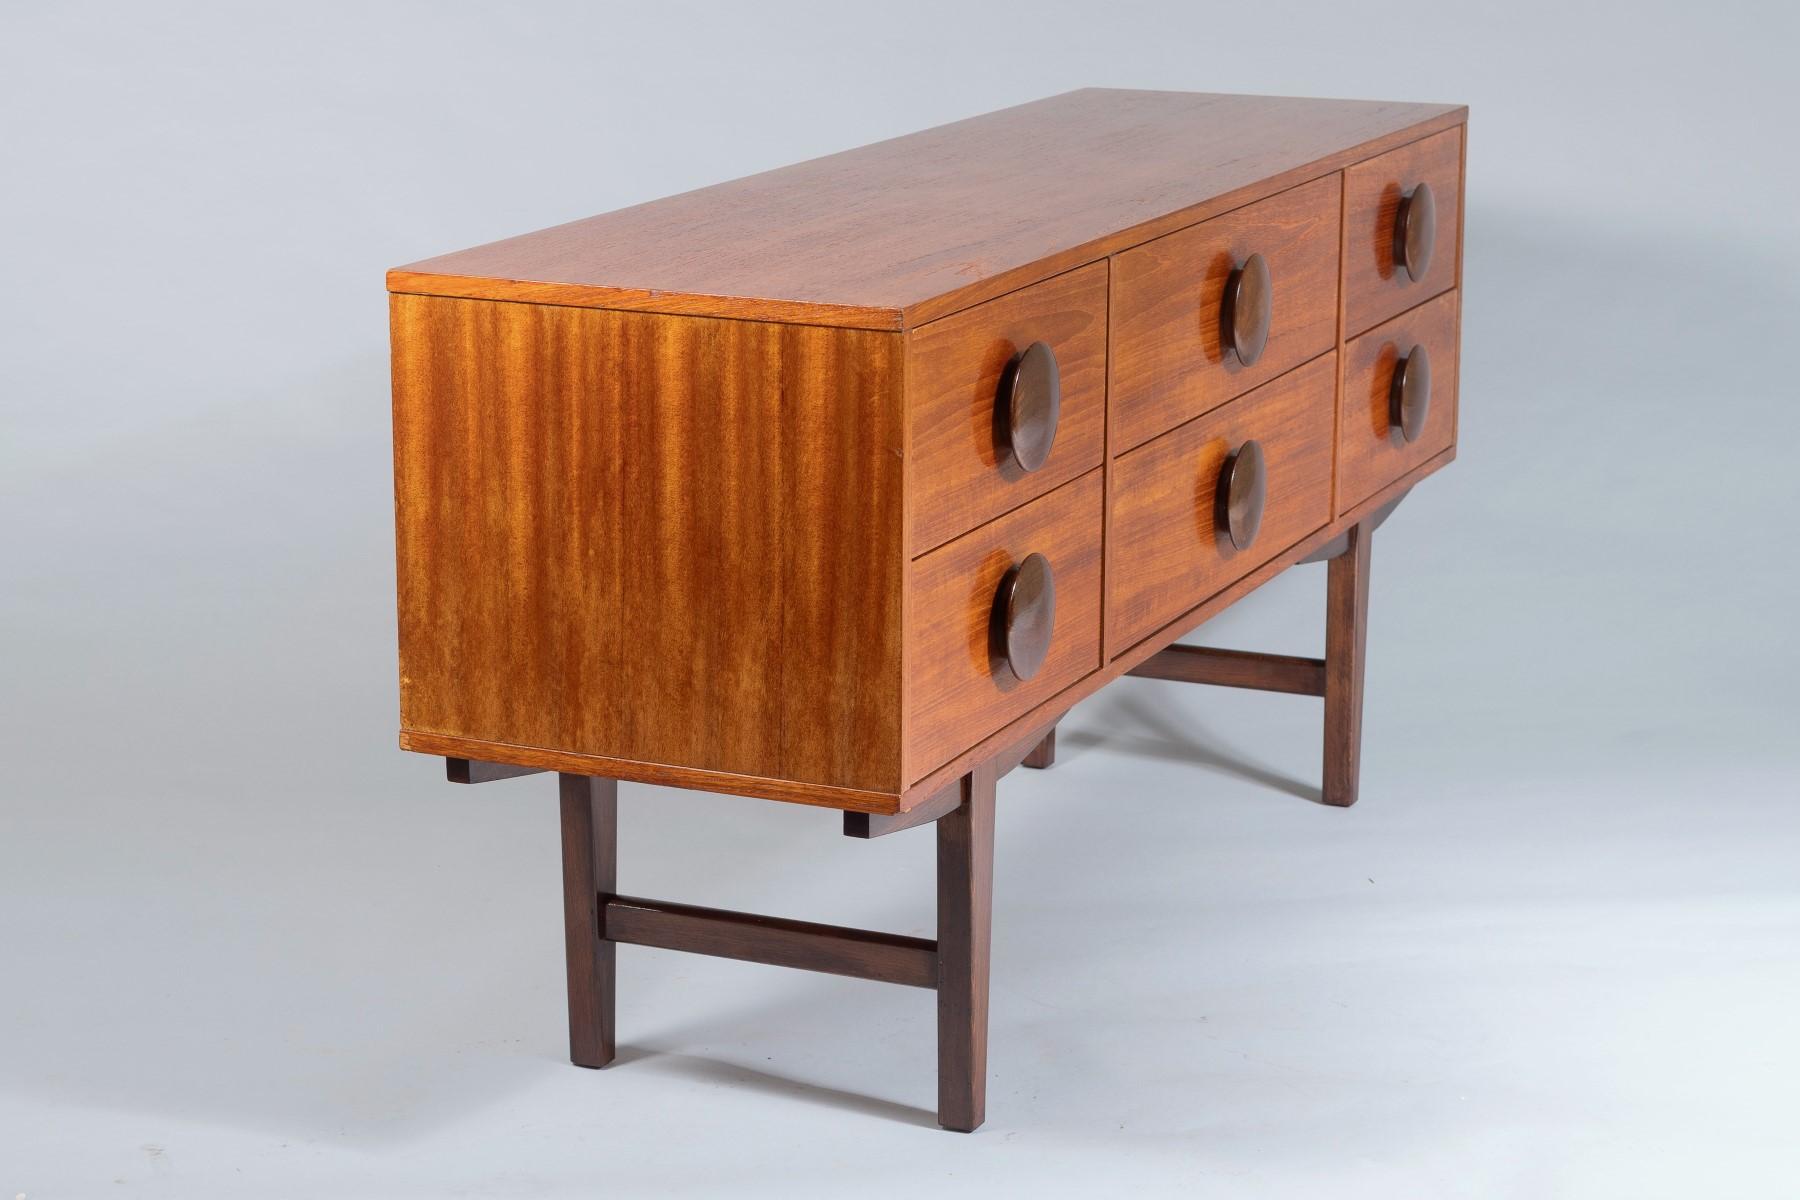 A 1960s Mid Century Button Handled Teak Sideboard  6 drawer Credenza For Sale 3